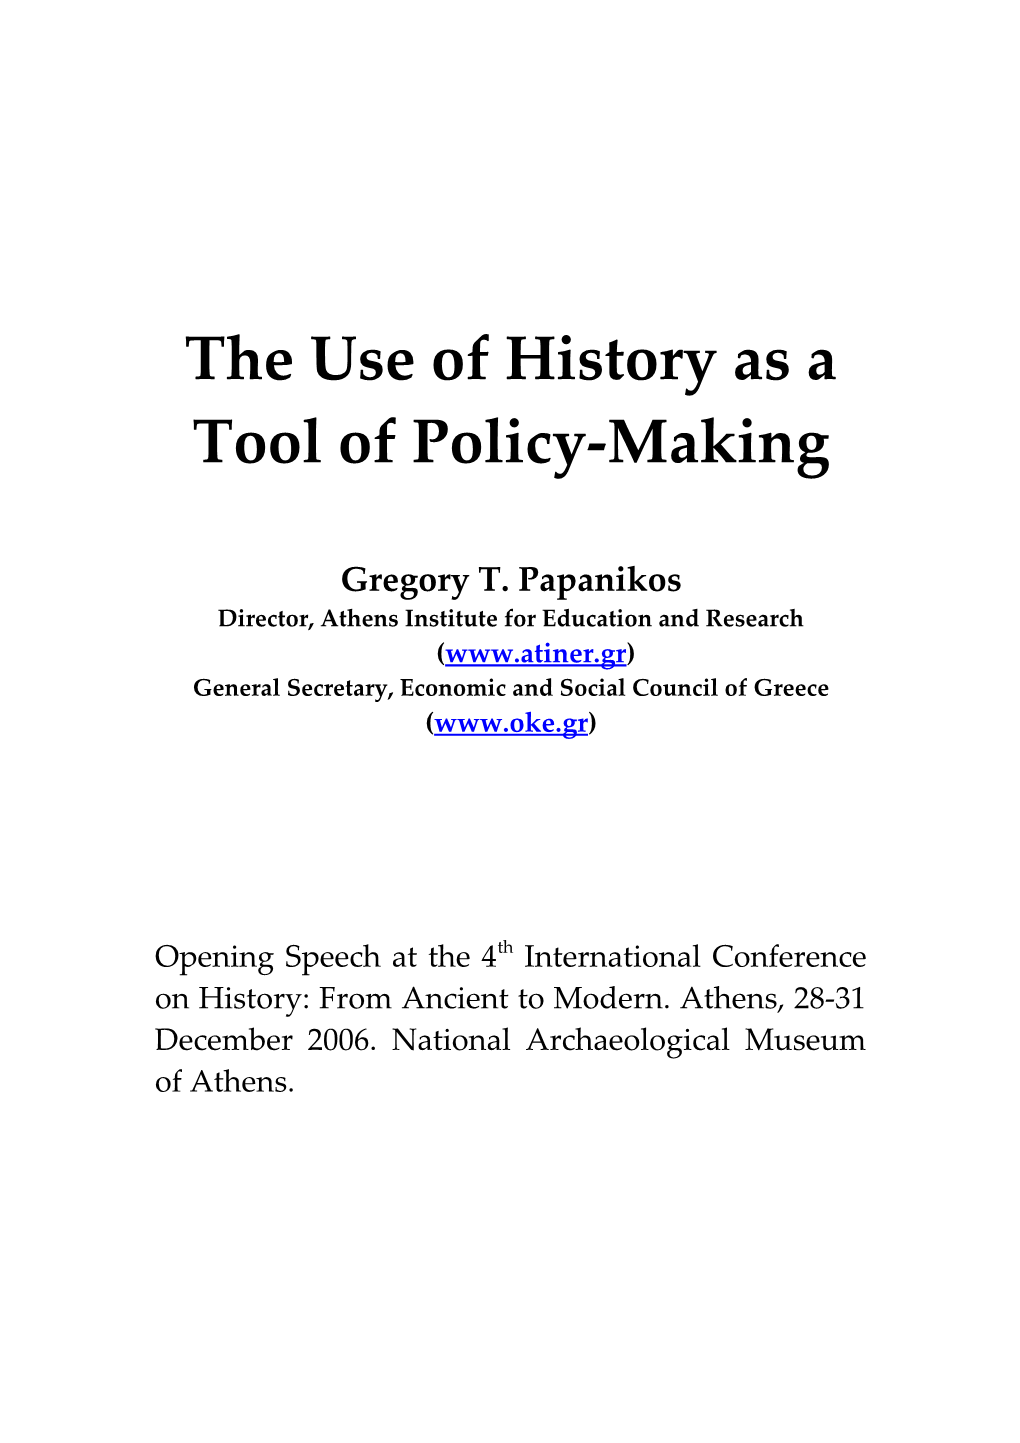 The Use of History As a Tool of Policy-Making